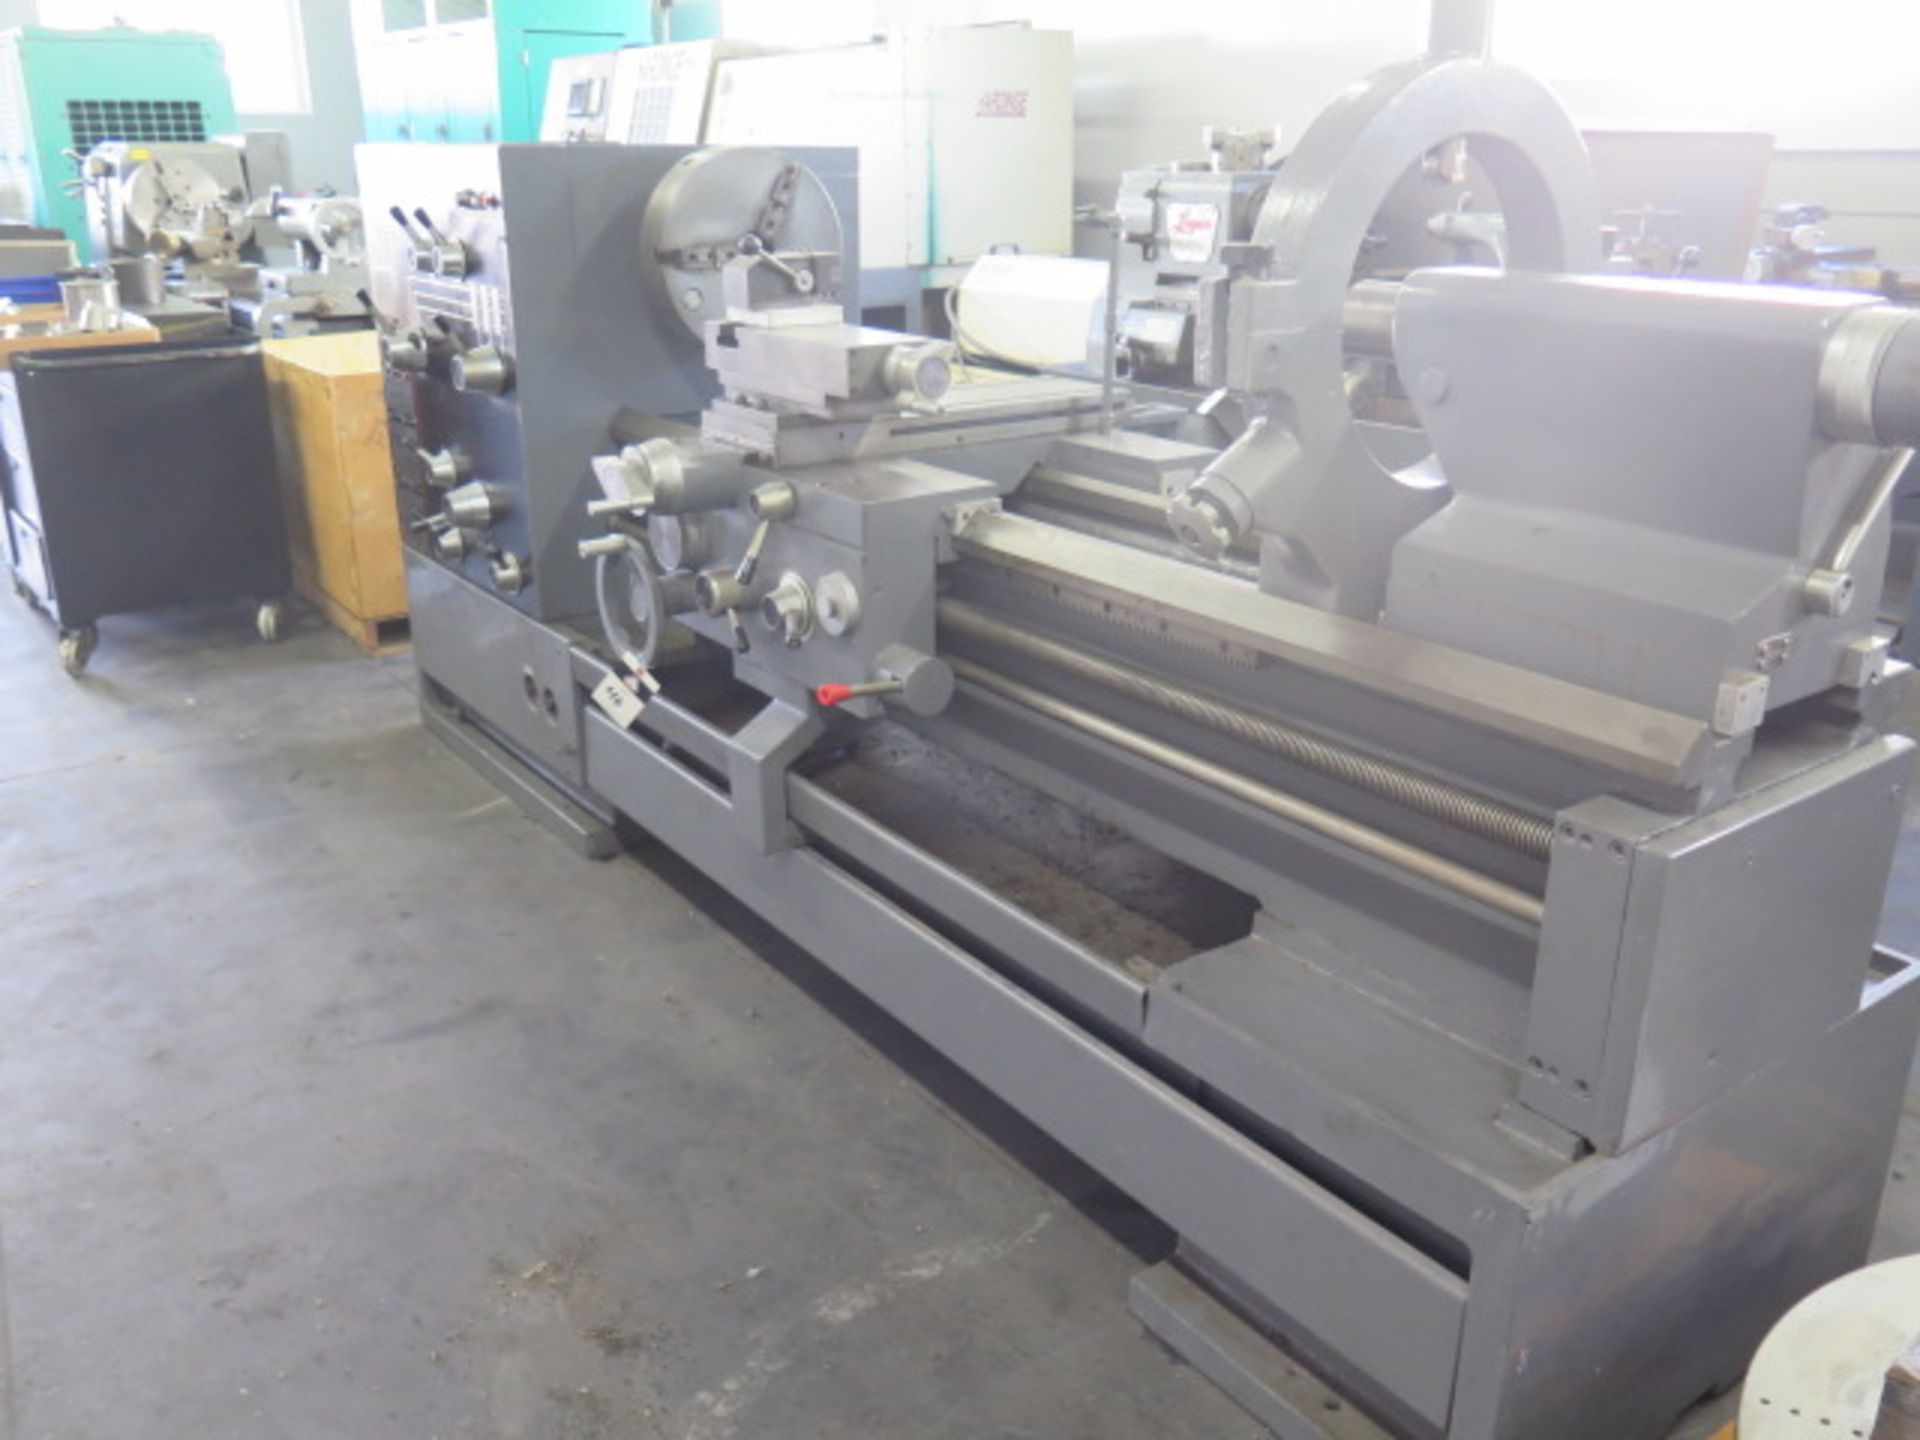 South Bend “Nordic 25” 25” x 60” Geared Gap Bed Lathe w/ 1801400 RPM, Taper Attachment, SOLD AS IS - Image 2 of 13